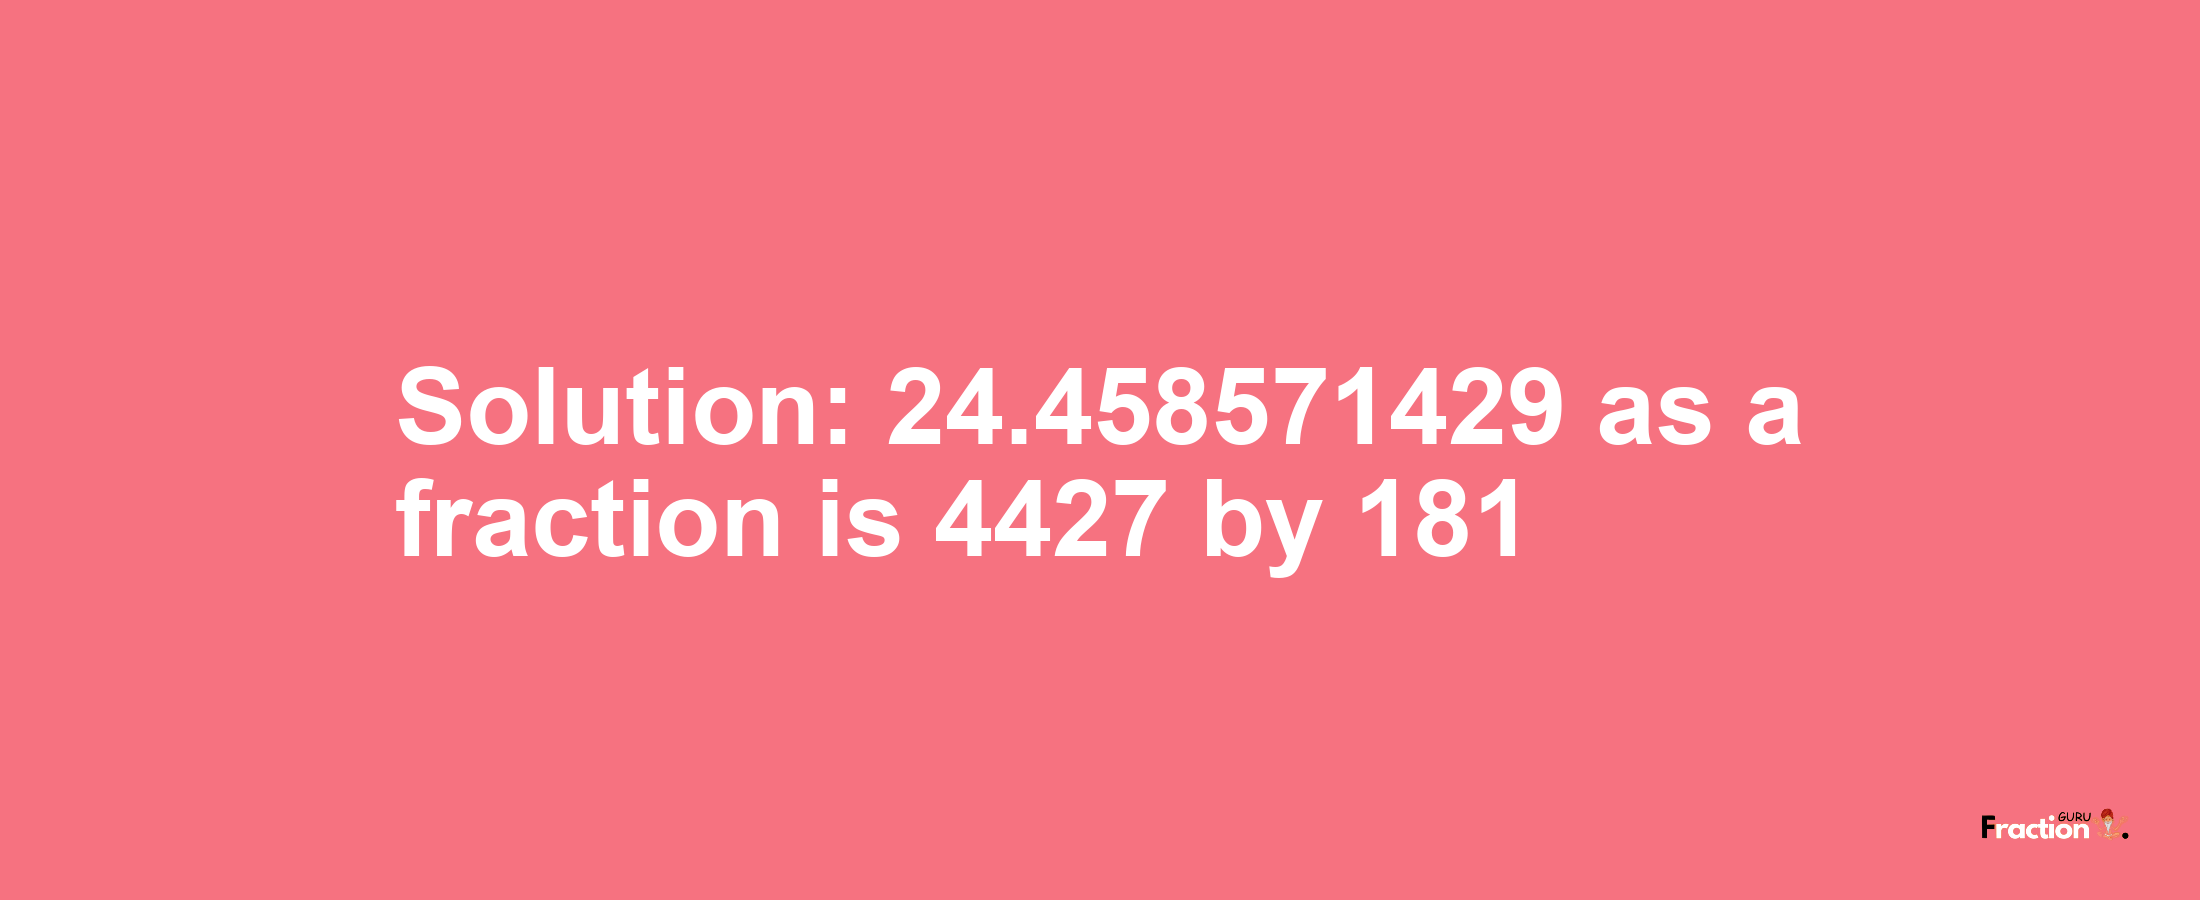 Solution:24.458571429 as a fraction is 4427/181